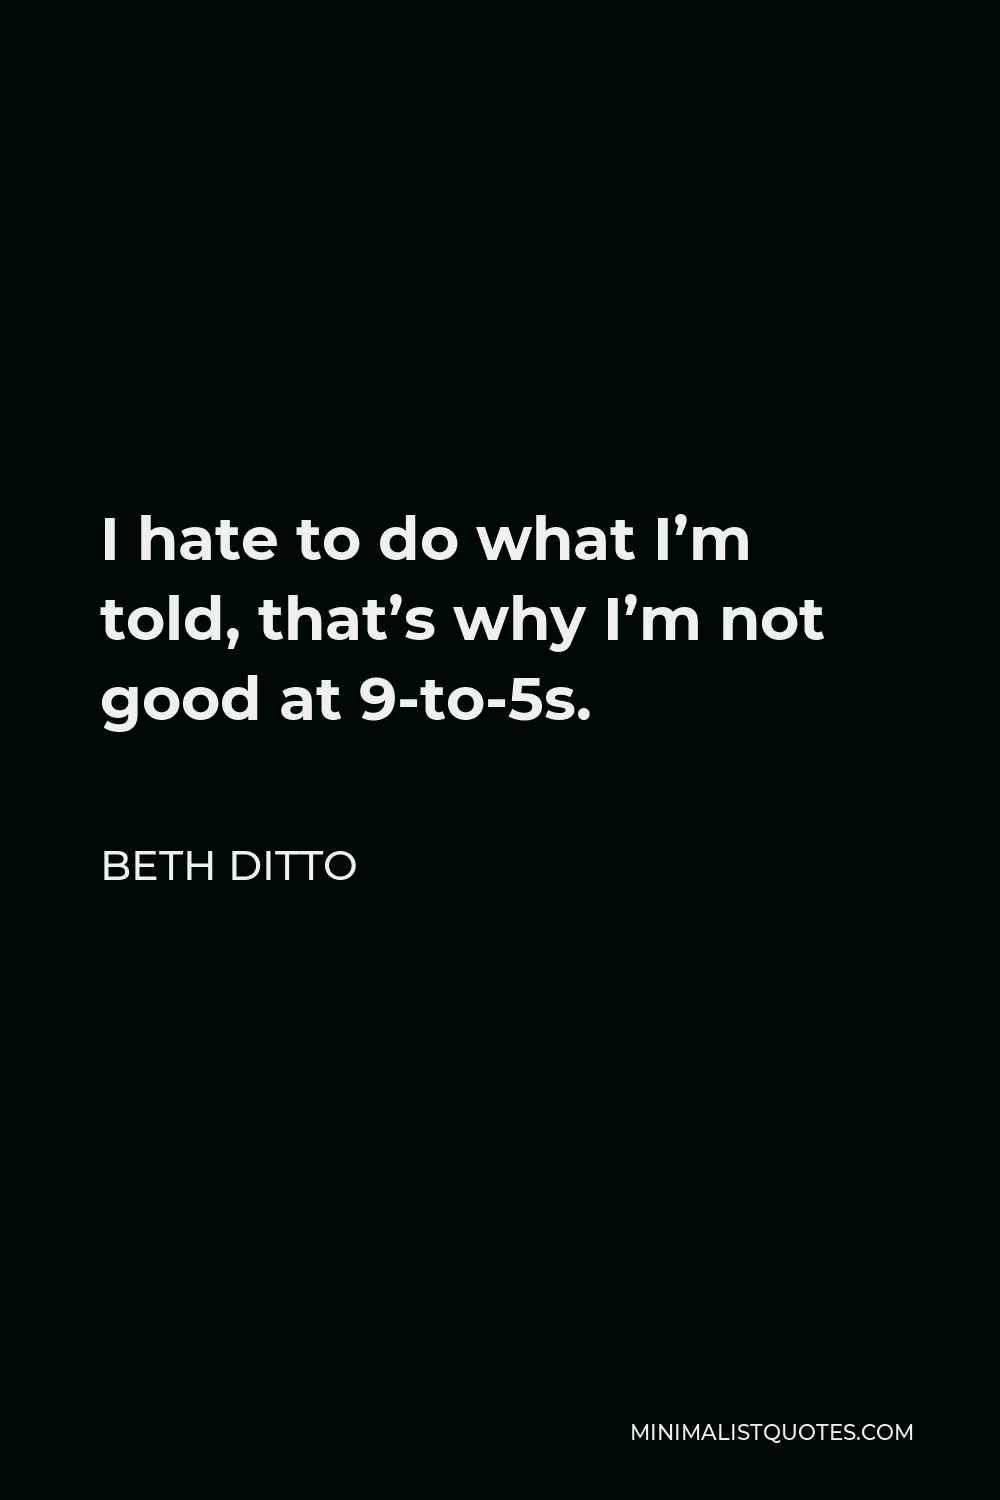 Beth Ditto Quote - I hate to do what I’m told, that’s why I’m not good at 9-to-5s.